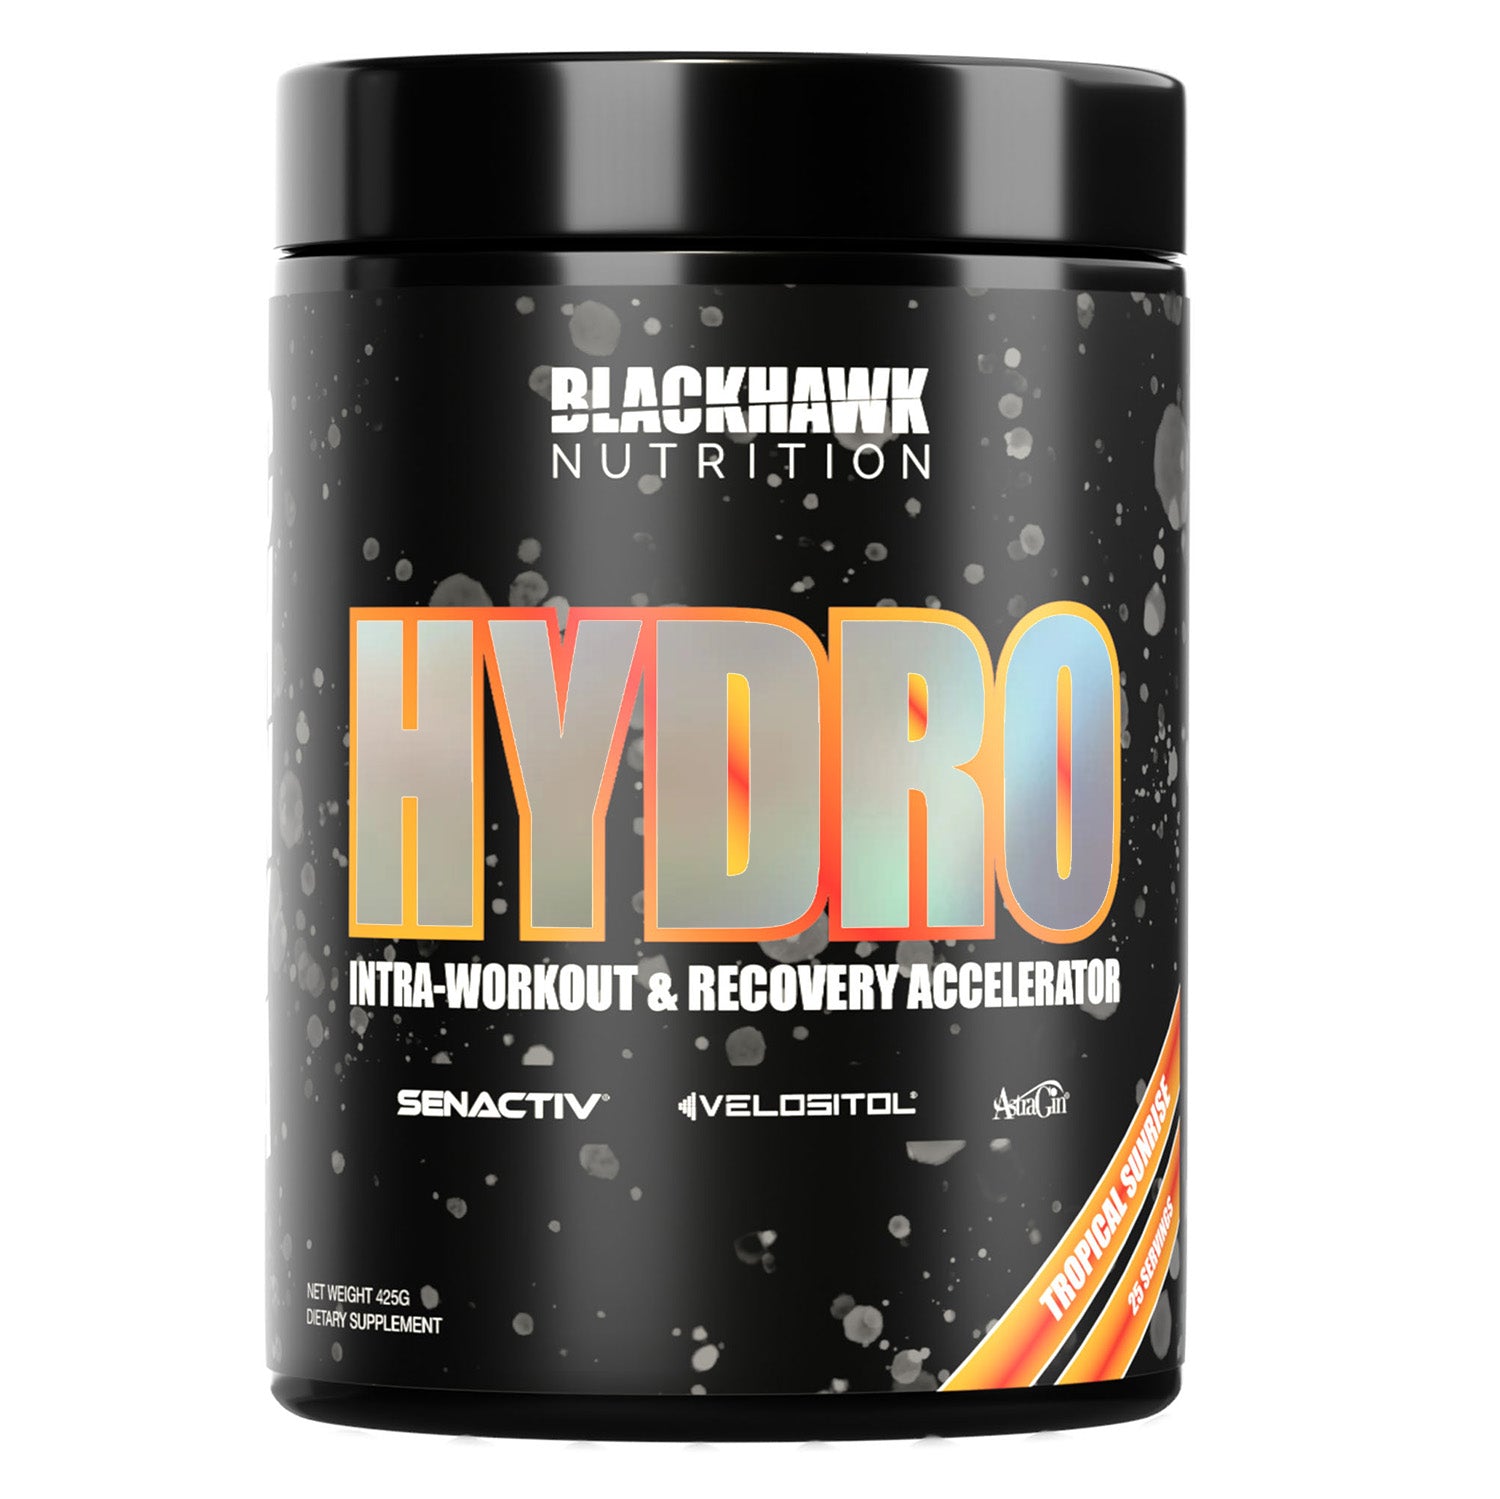 Hydro - Intra-Workout & Recovery Accelerator - 425g